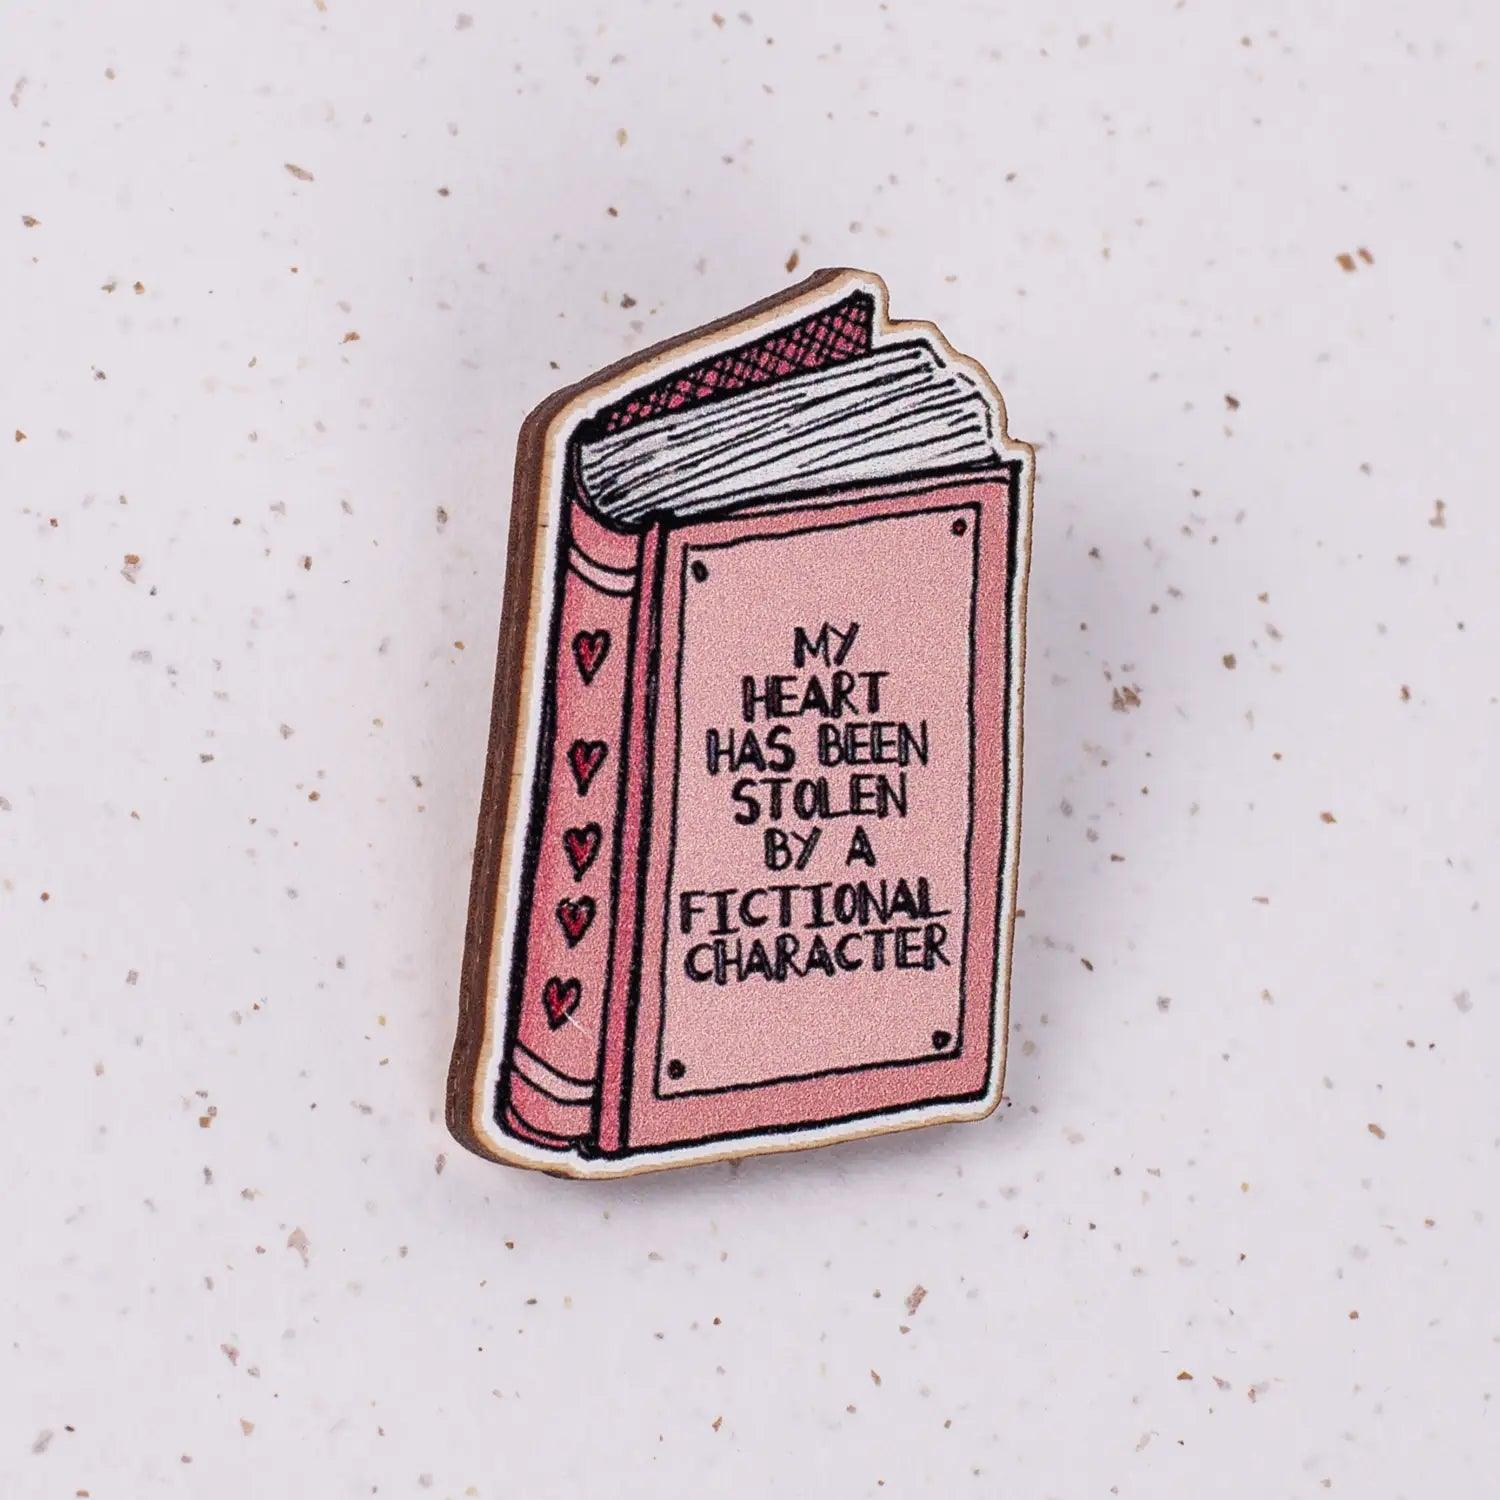 "My heart has been stolen by a fictional character." Pink book design